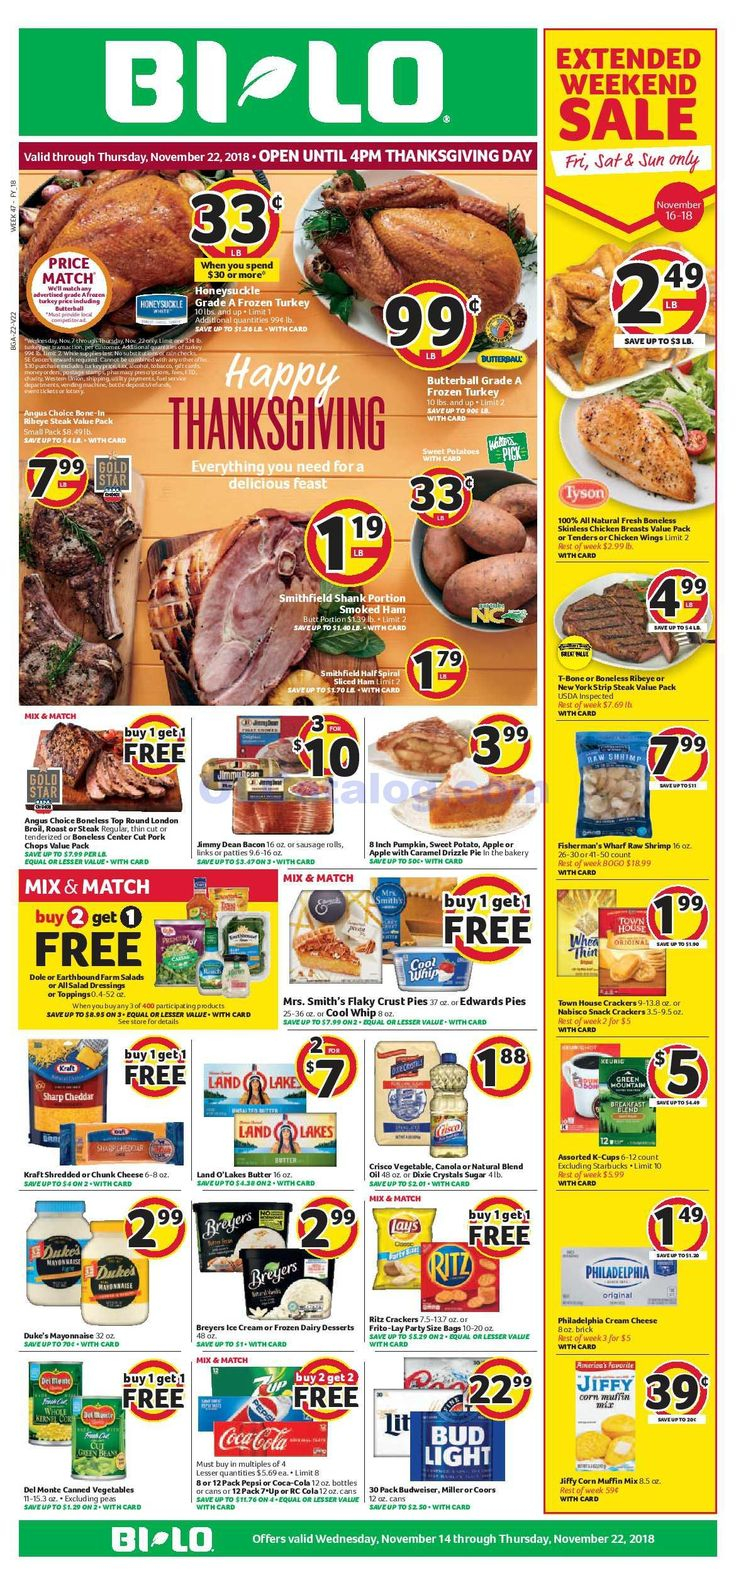 Bilo Weekly Ad November 14 22 2018 View The Latest 